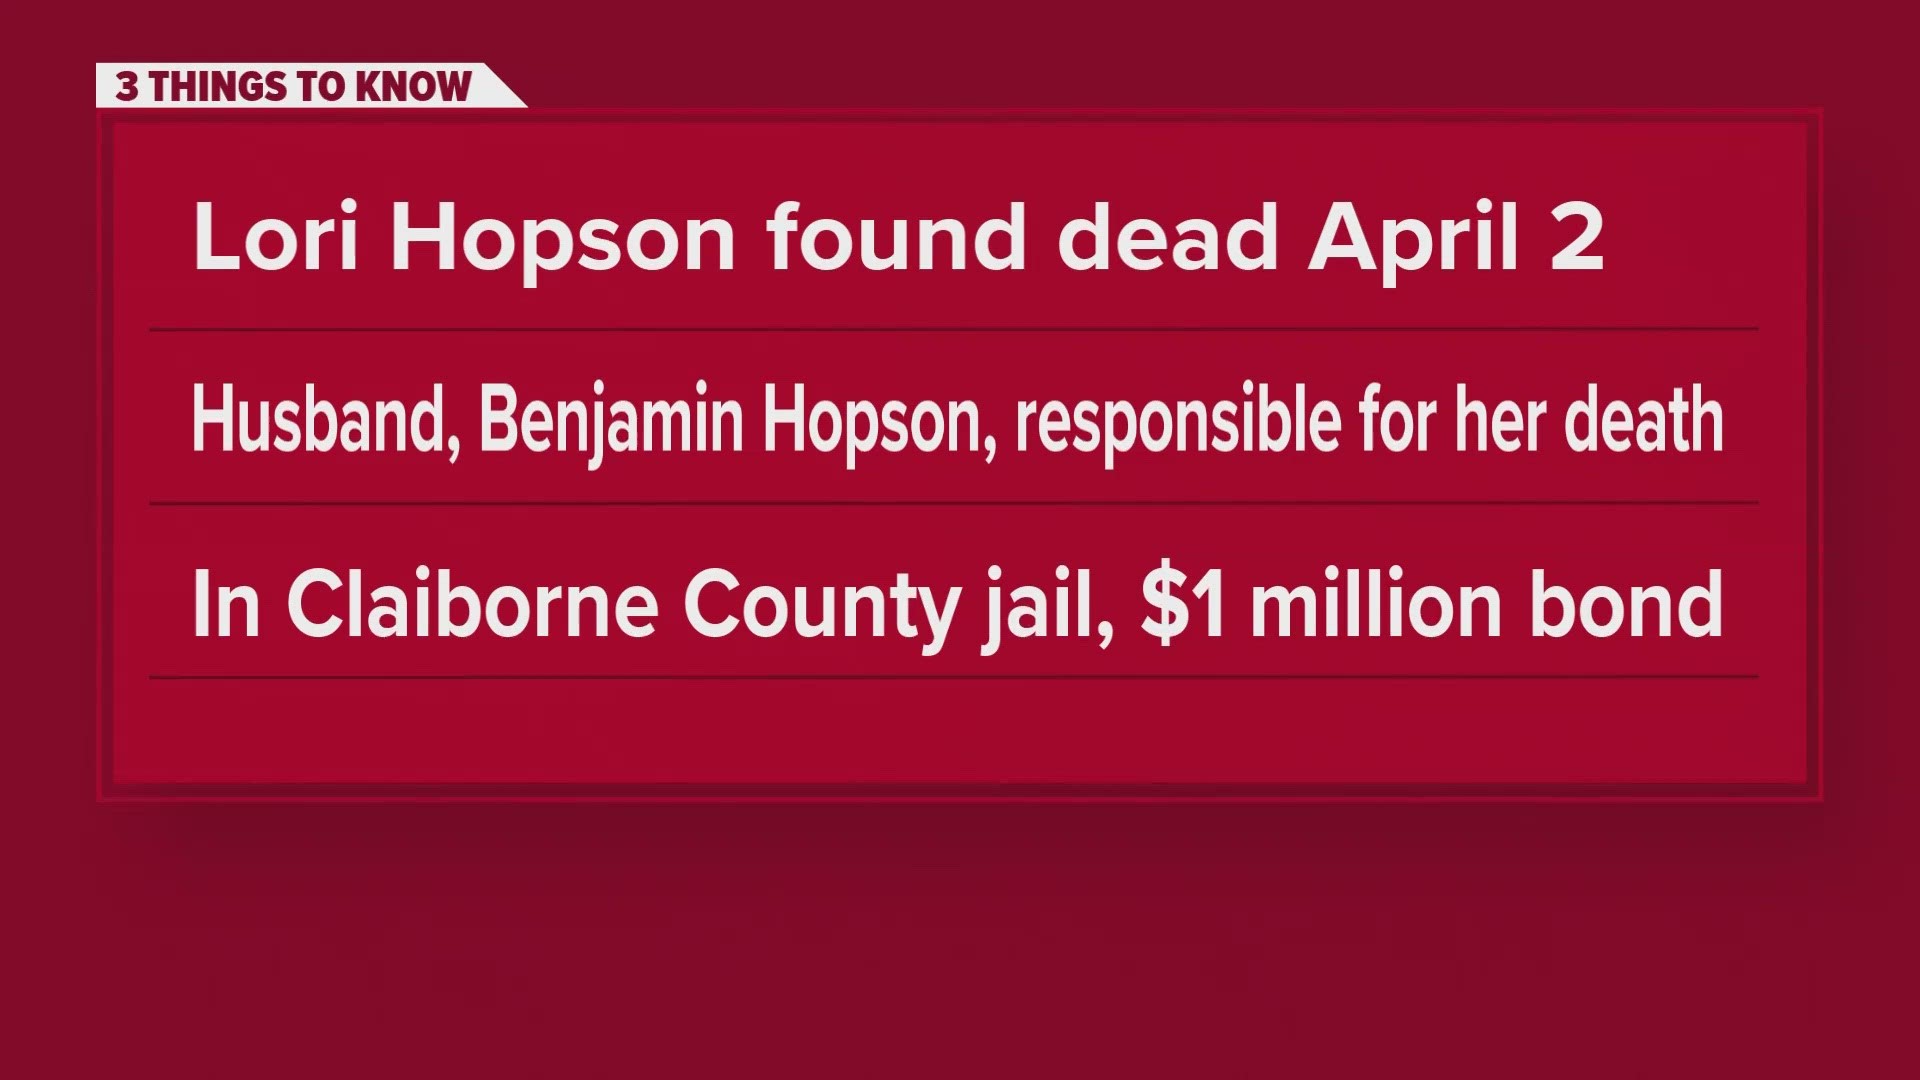 Benjamin Hopson was charged with criminal homicide after his wife's body, Lori Ann Hopson, was found along Barren Creek Road.